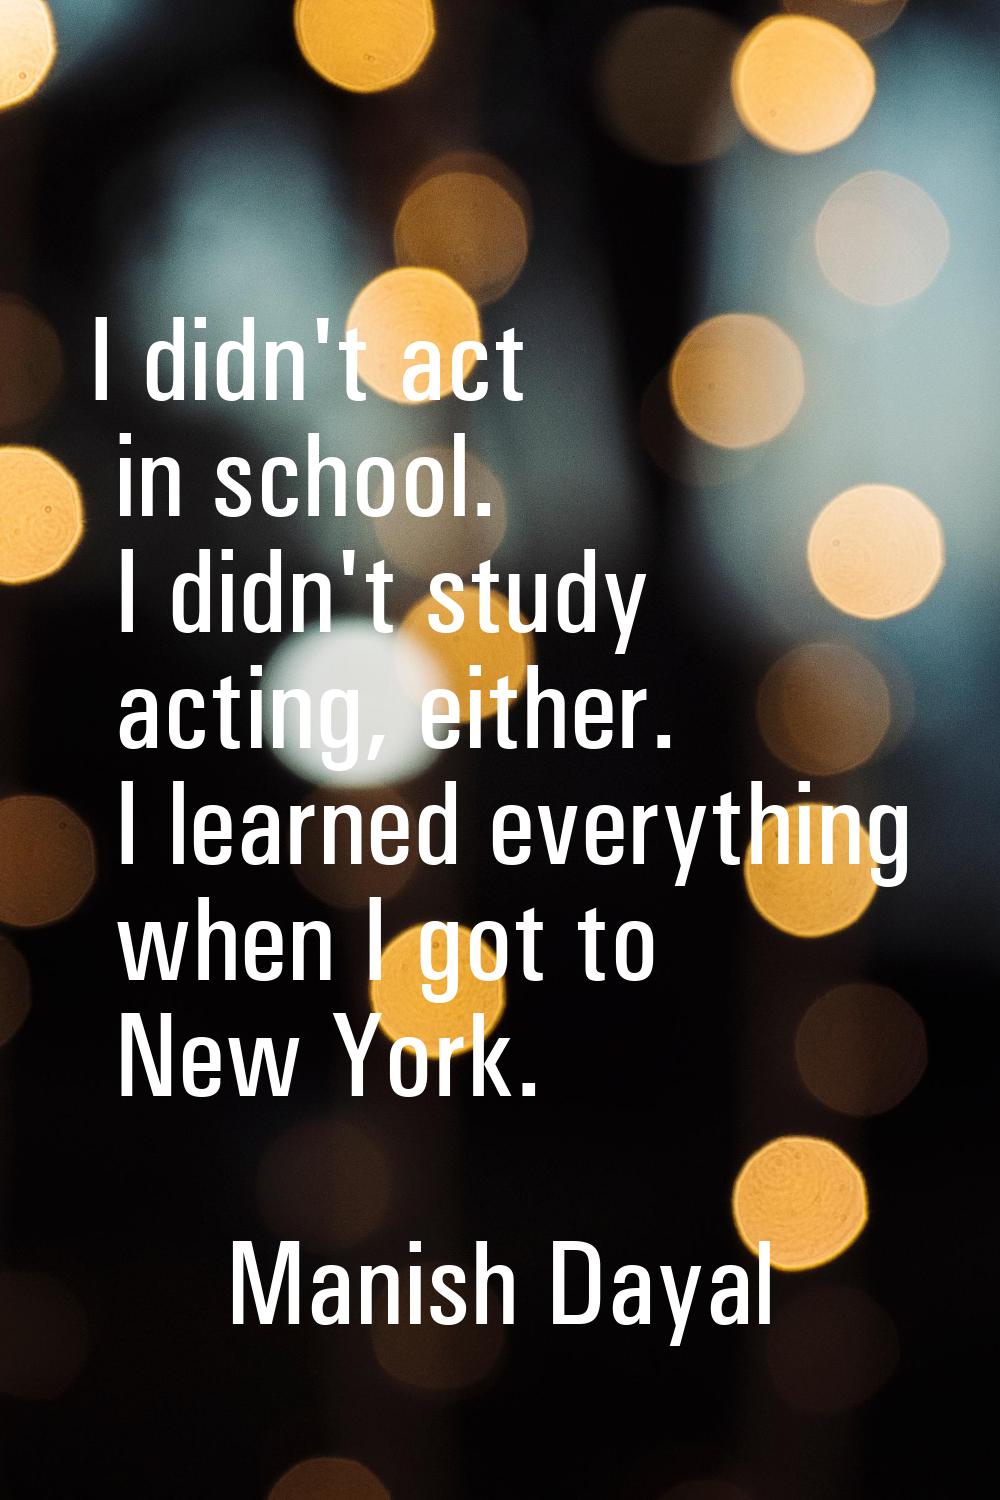 I didn't act in school. I didn't study acting, either. I learned everything when I got to New York.